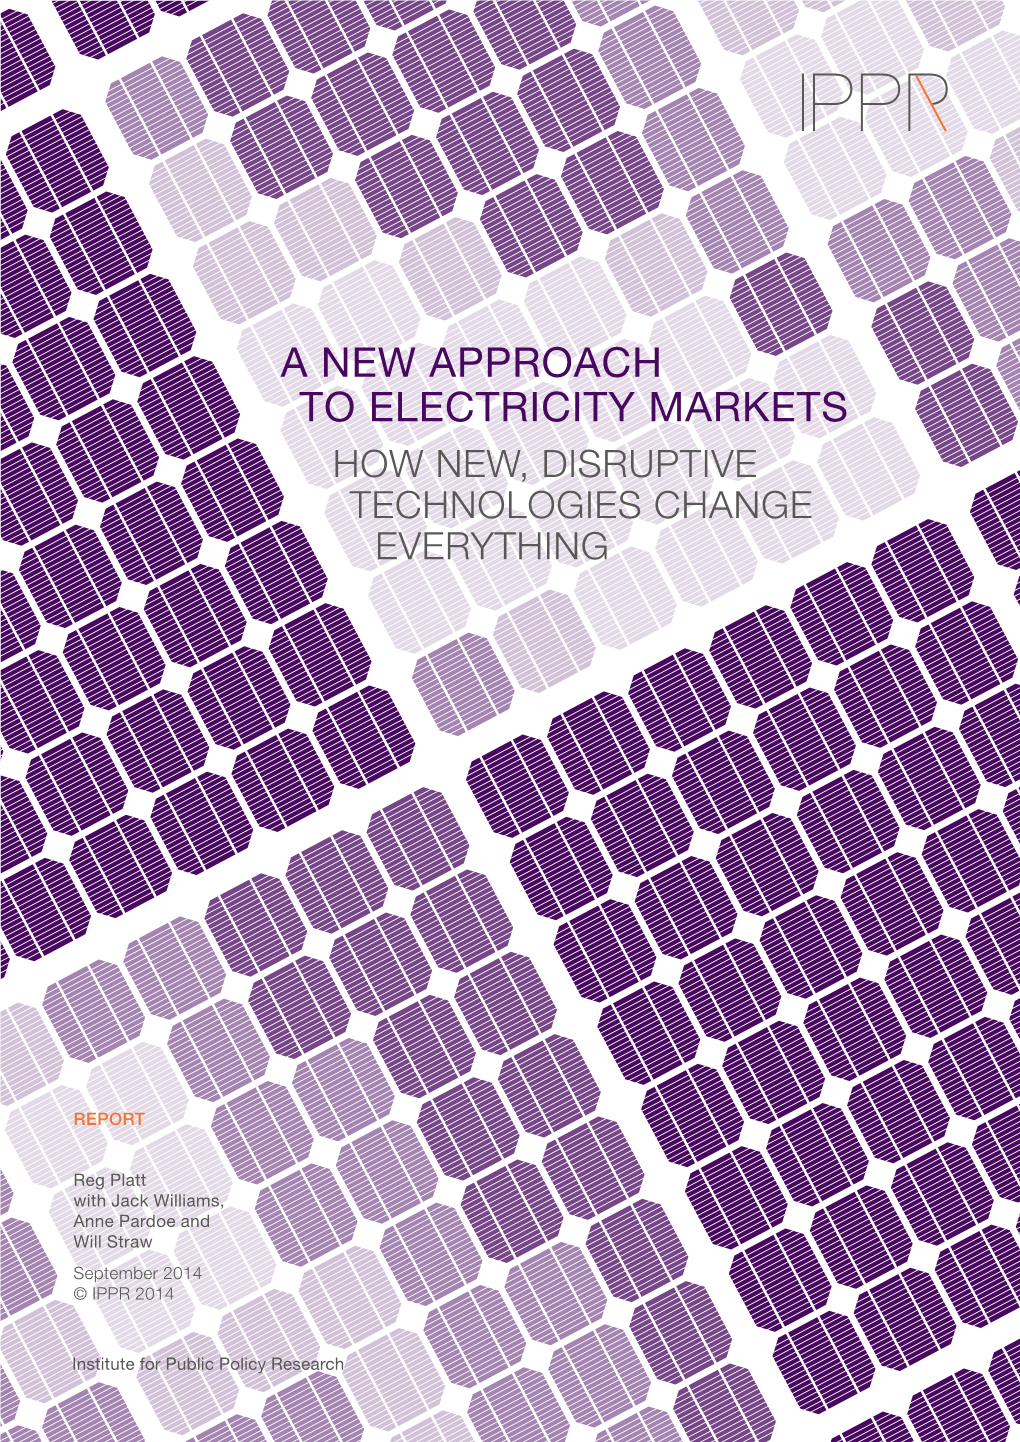 A New Approach to Electricity Markets How New, Disruptive Technologies Change Everything